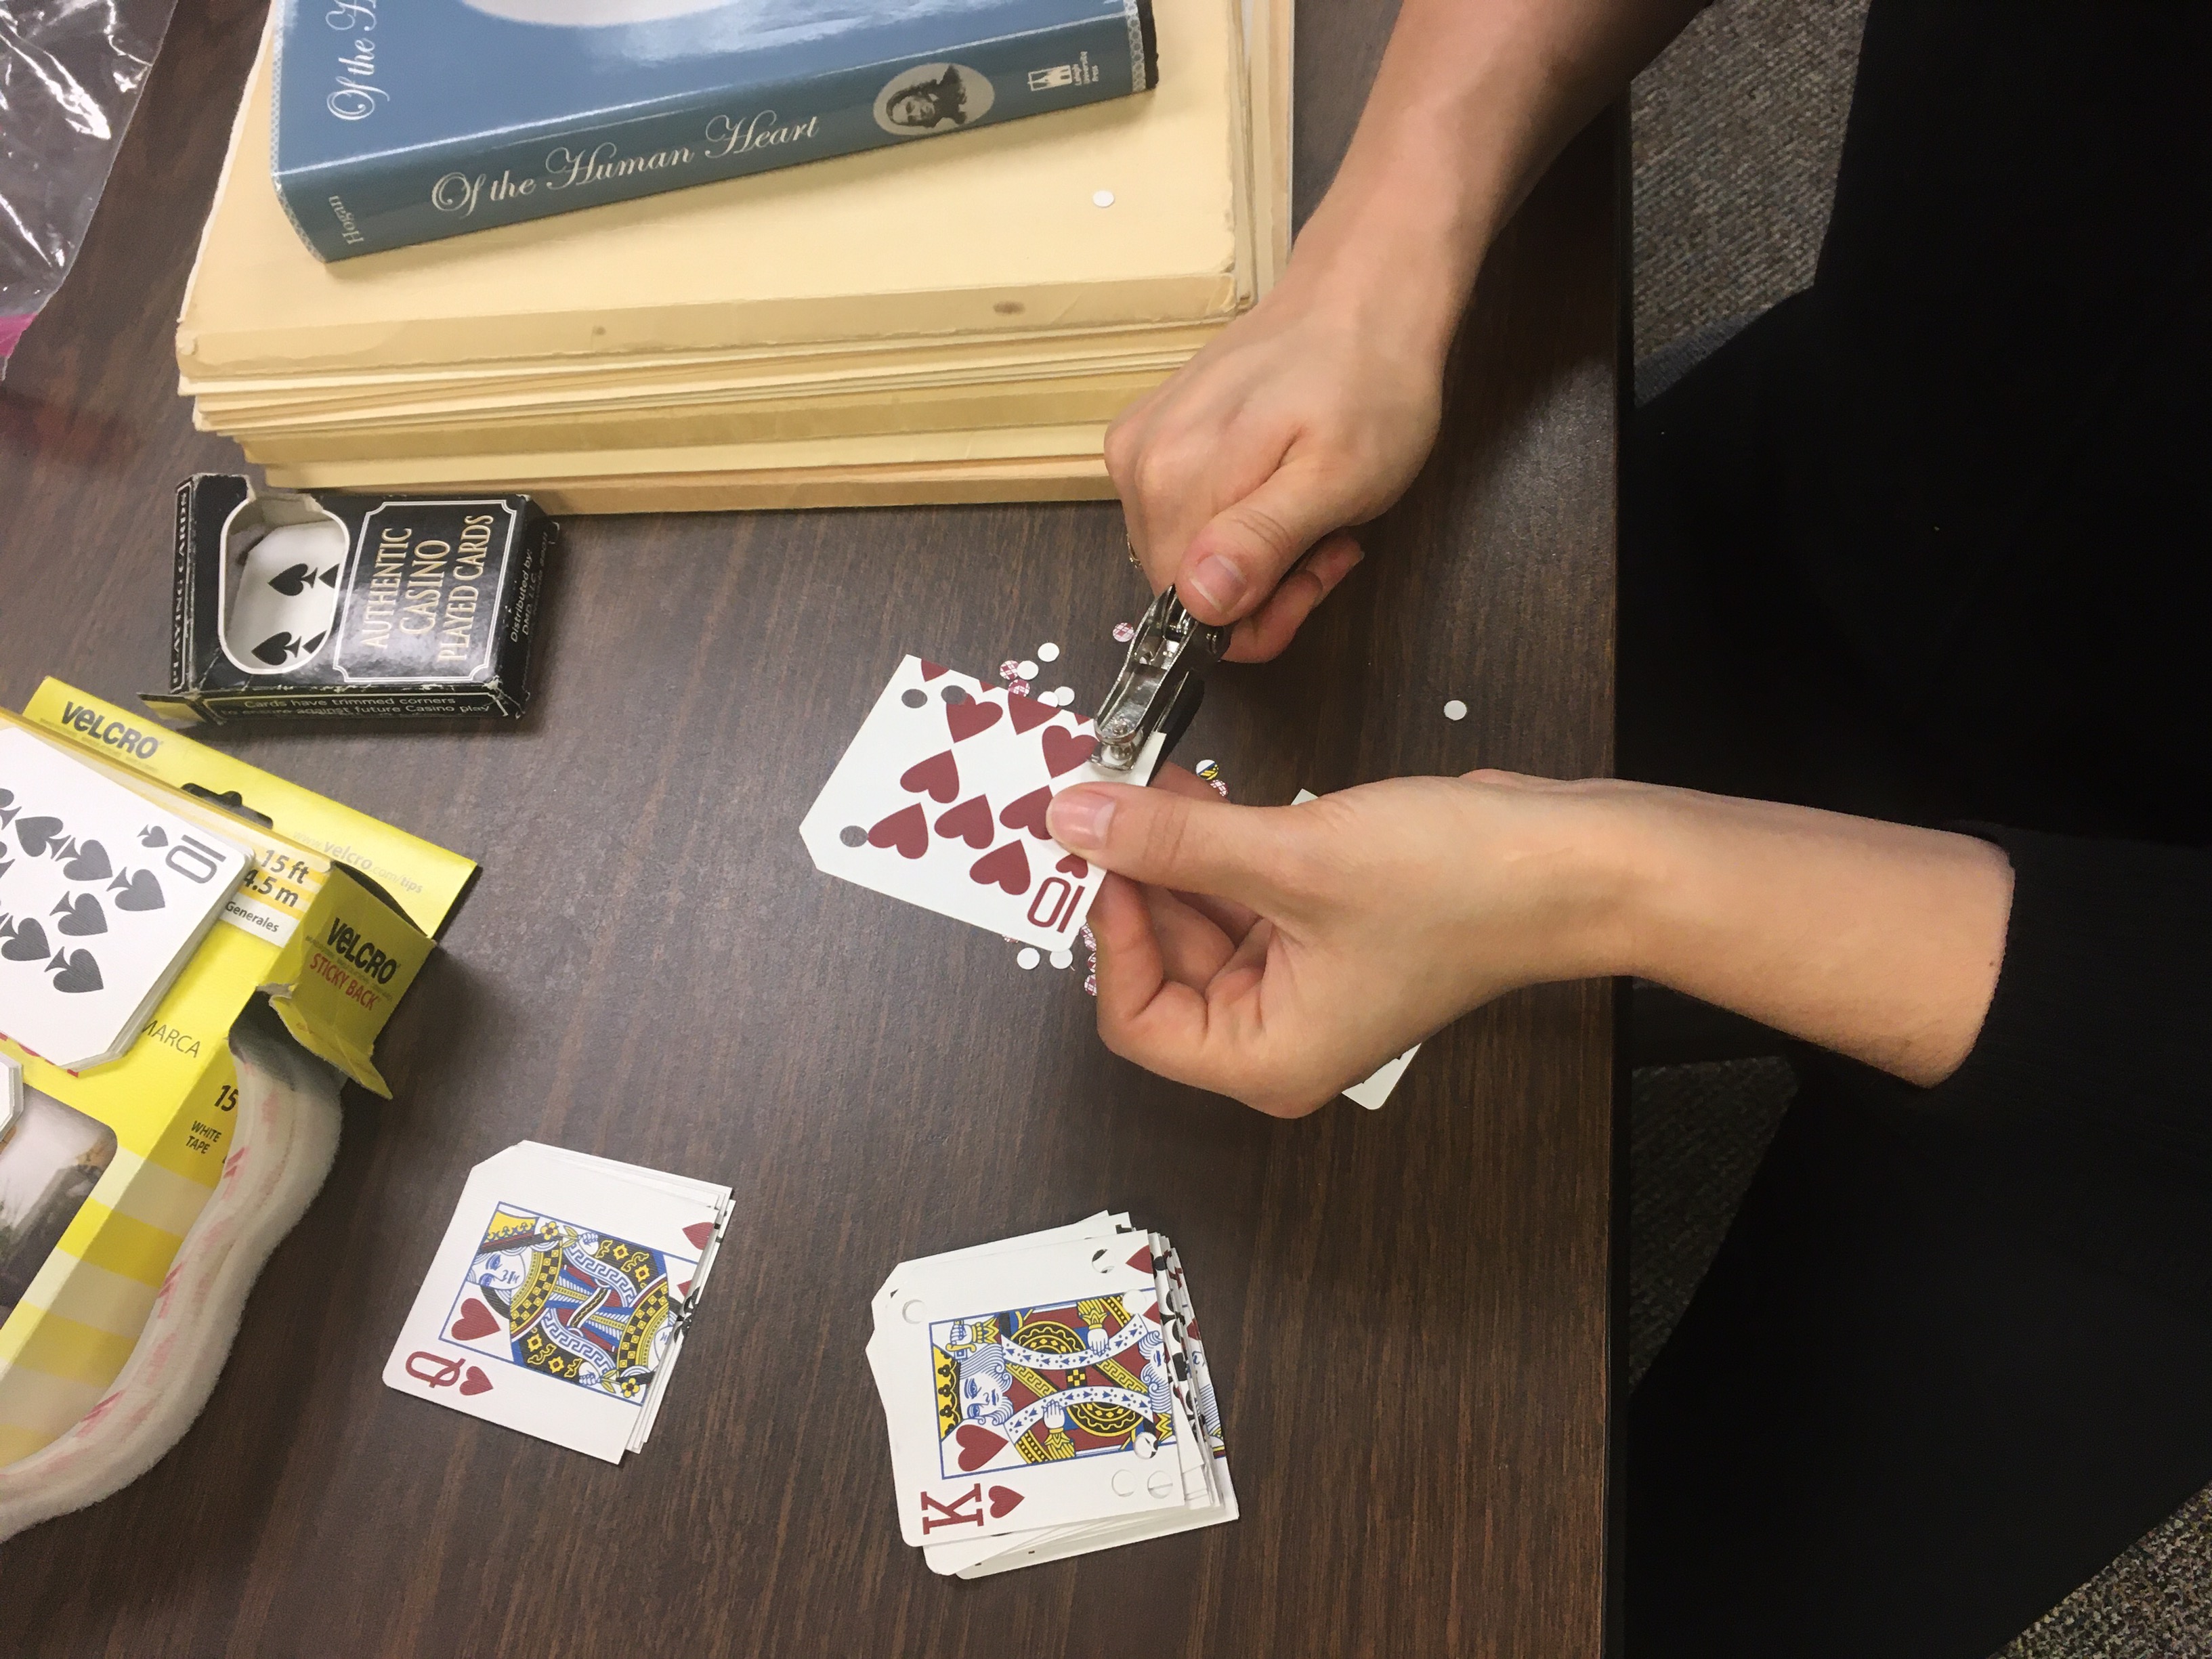 We recreated the adapted playing card method of data collection as described by Peirce and Jastrow.